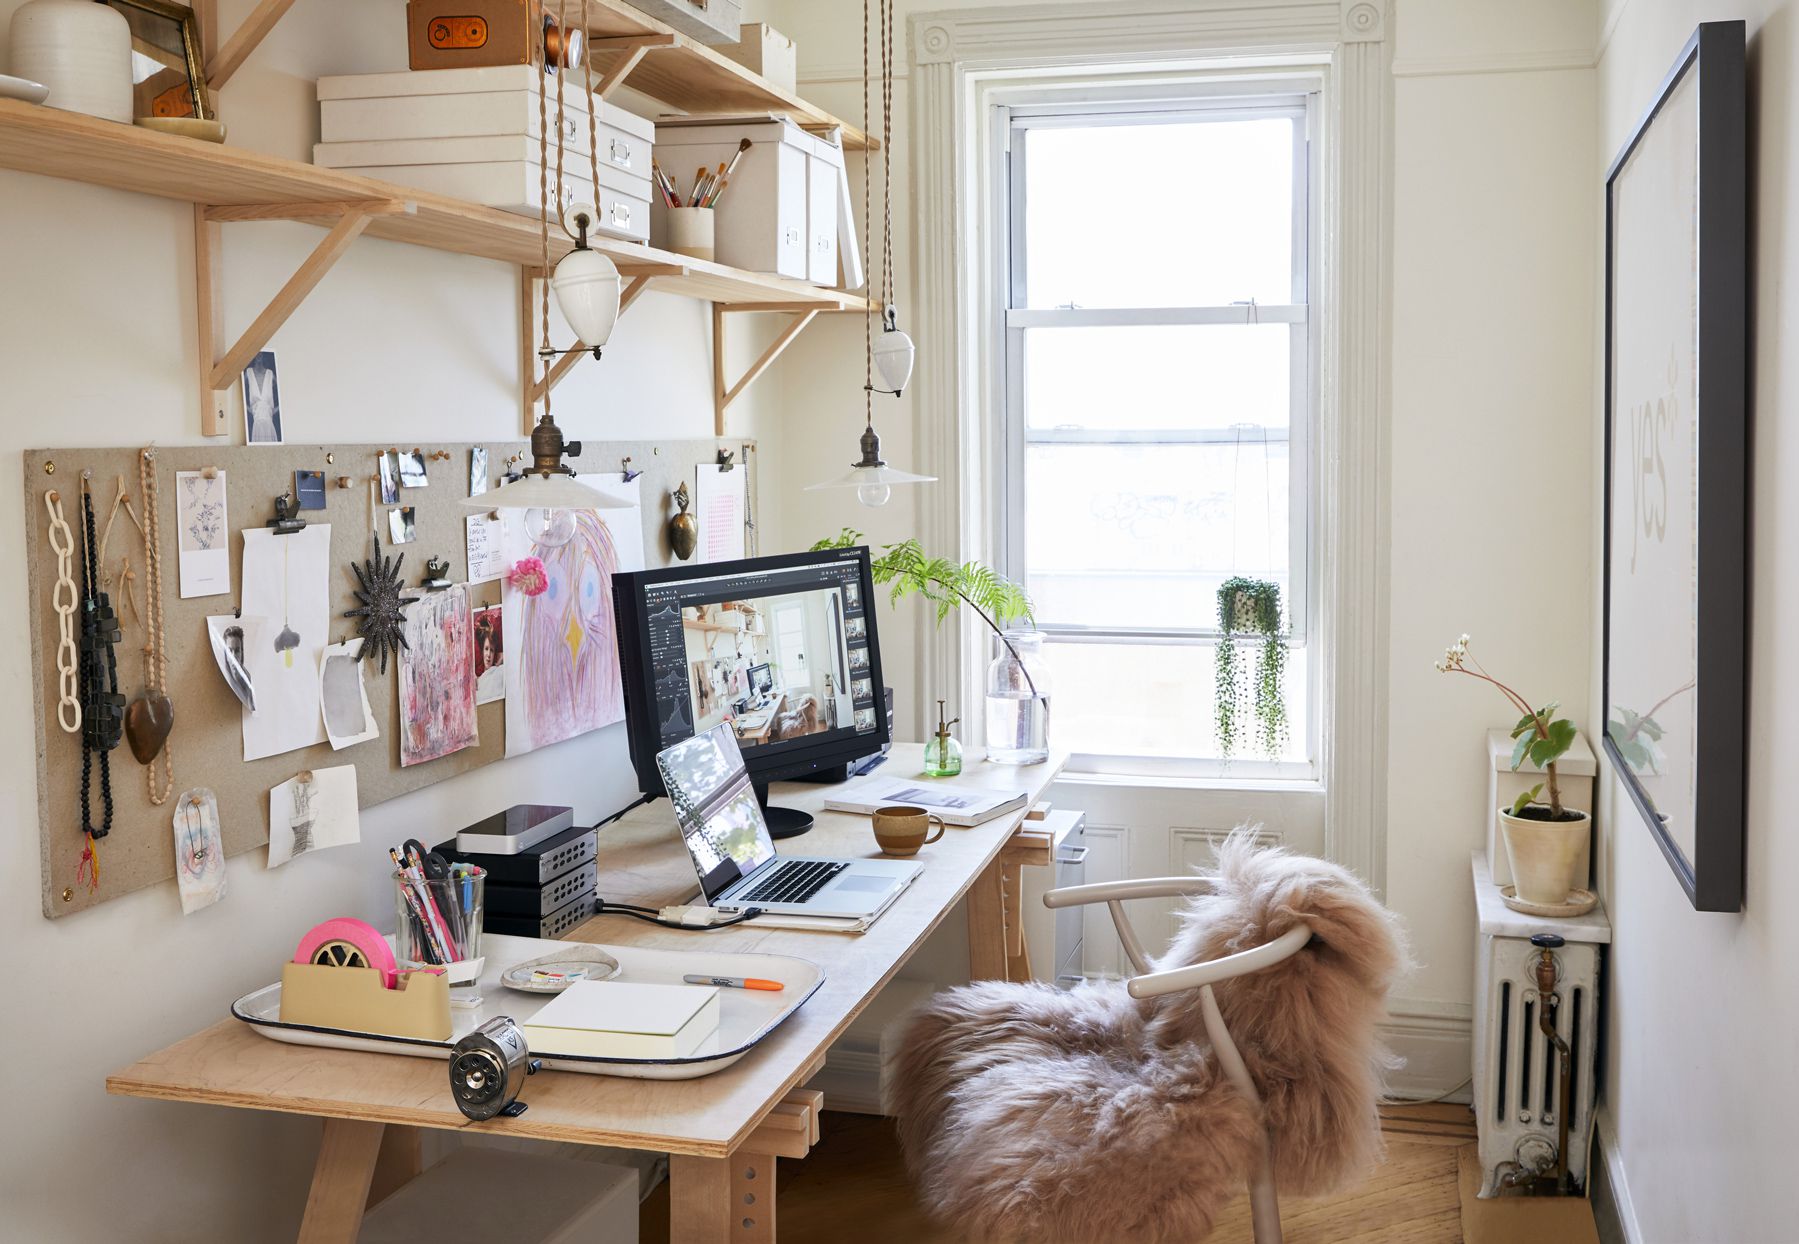 “Creating the Perfect Home Office: Tips for Designing a Productive Workspace”